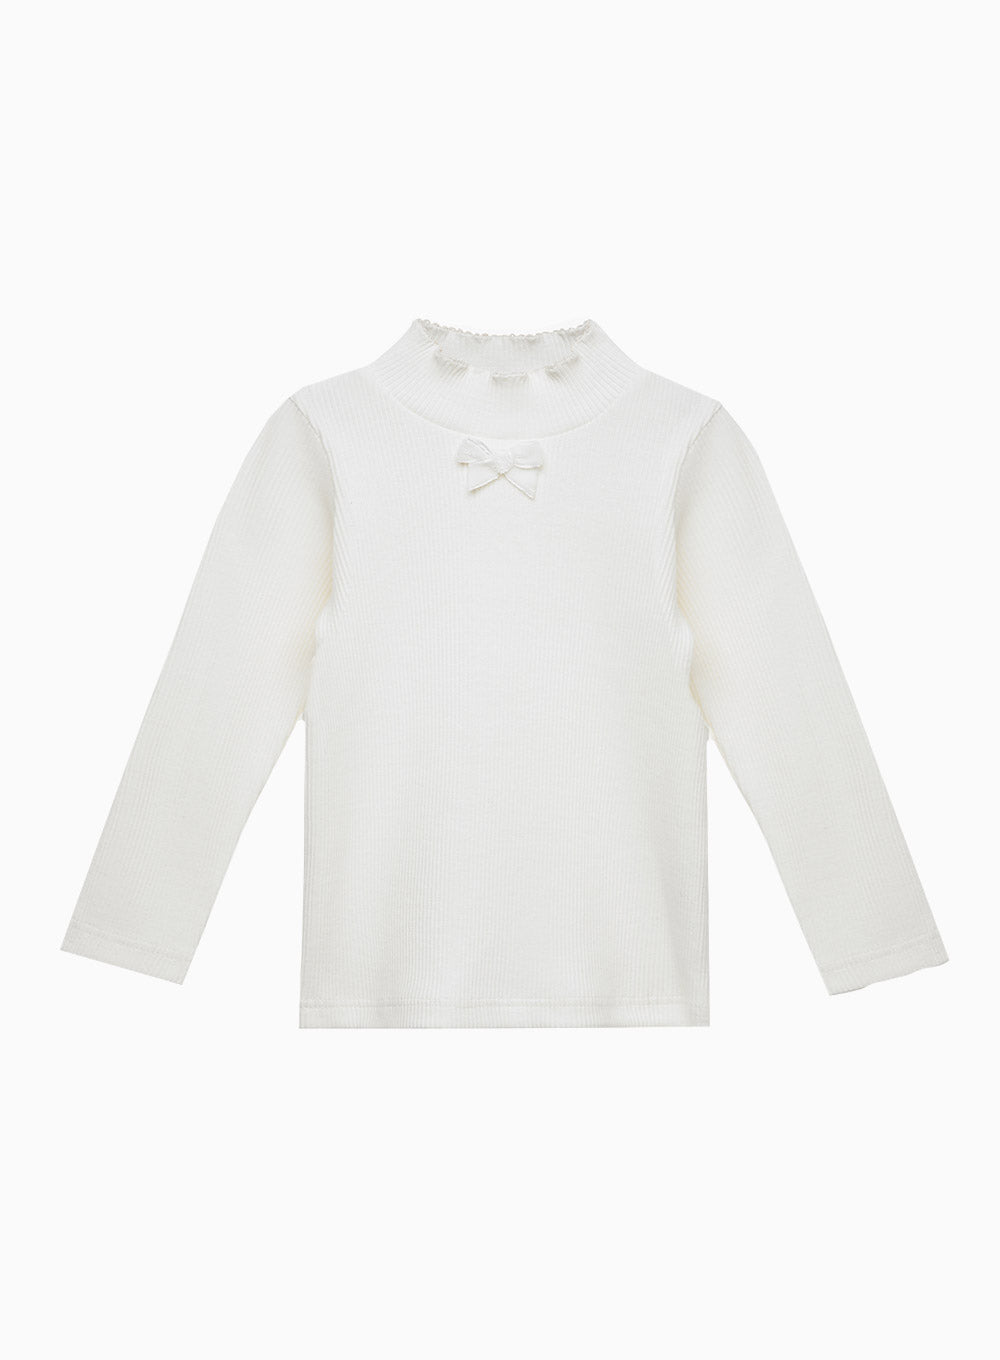 Grace Bow Jersey Top in White